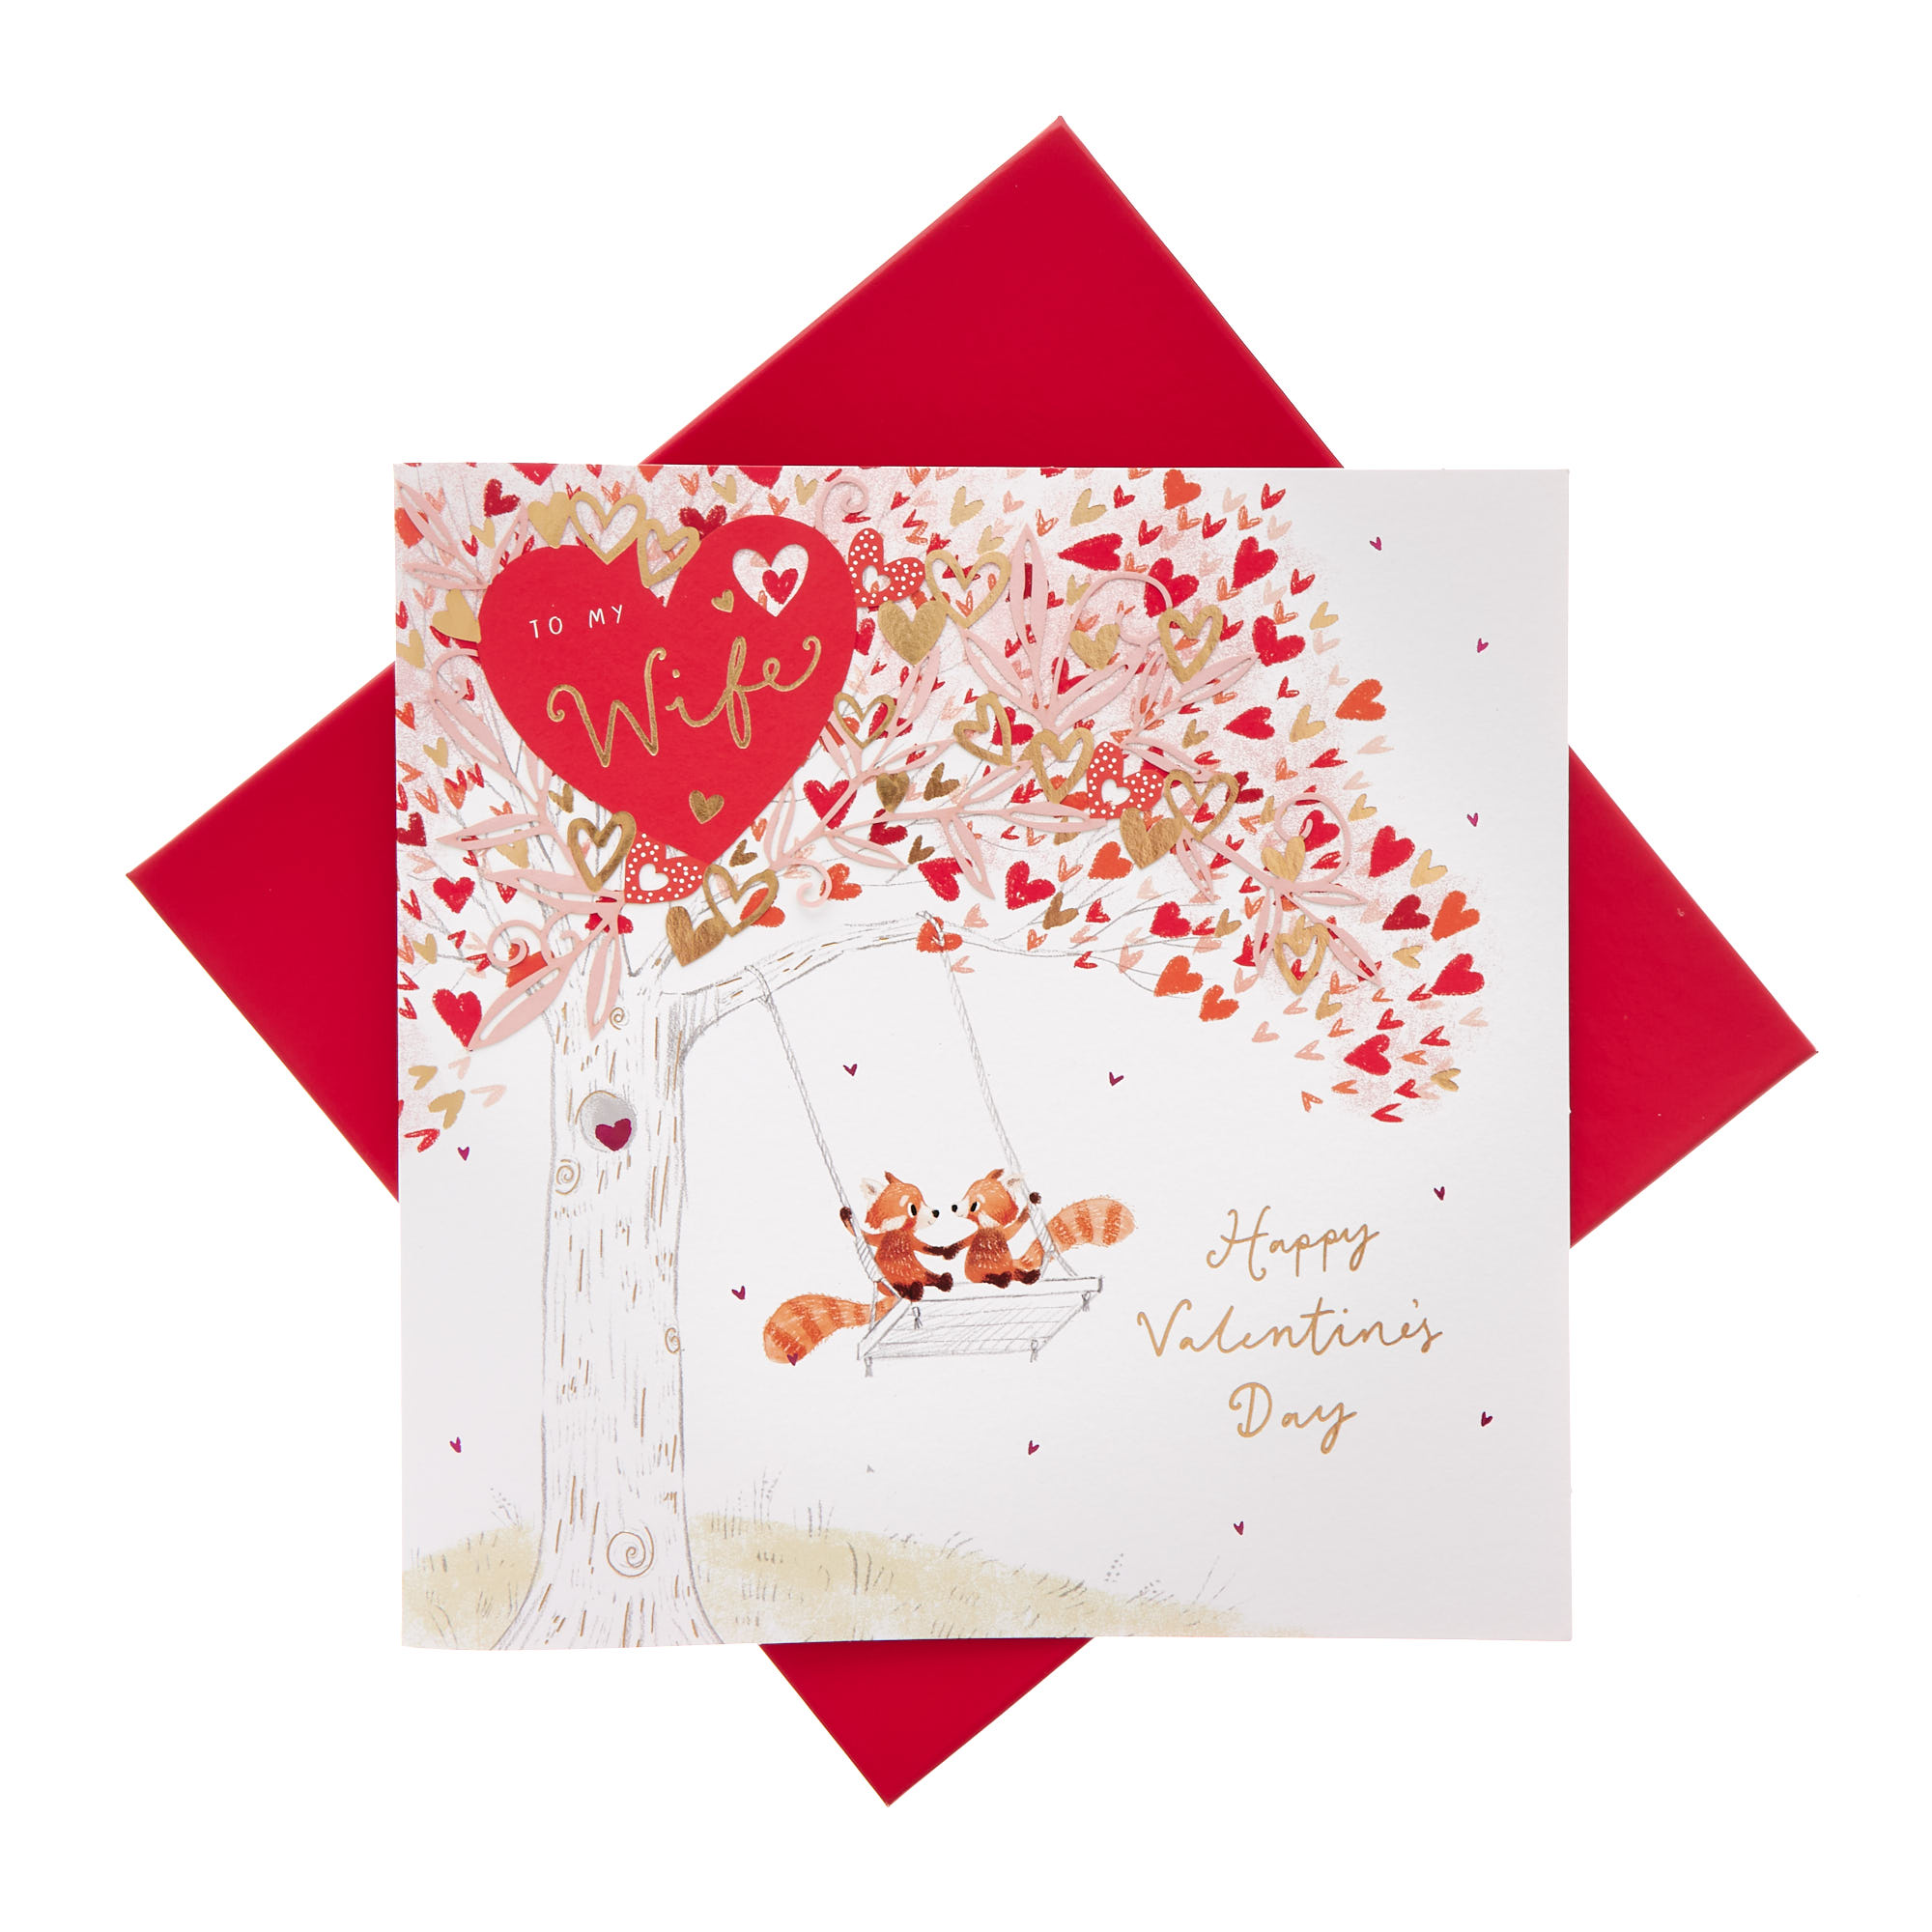 Wife Foxes on Swing Luxury Boxed Valentine's Day Card